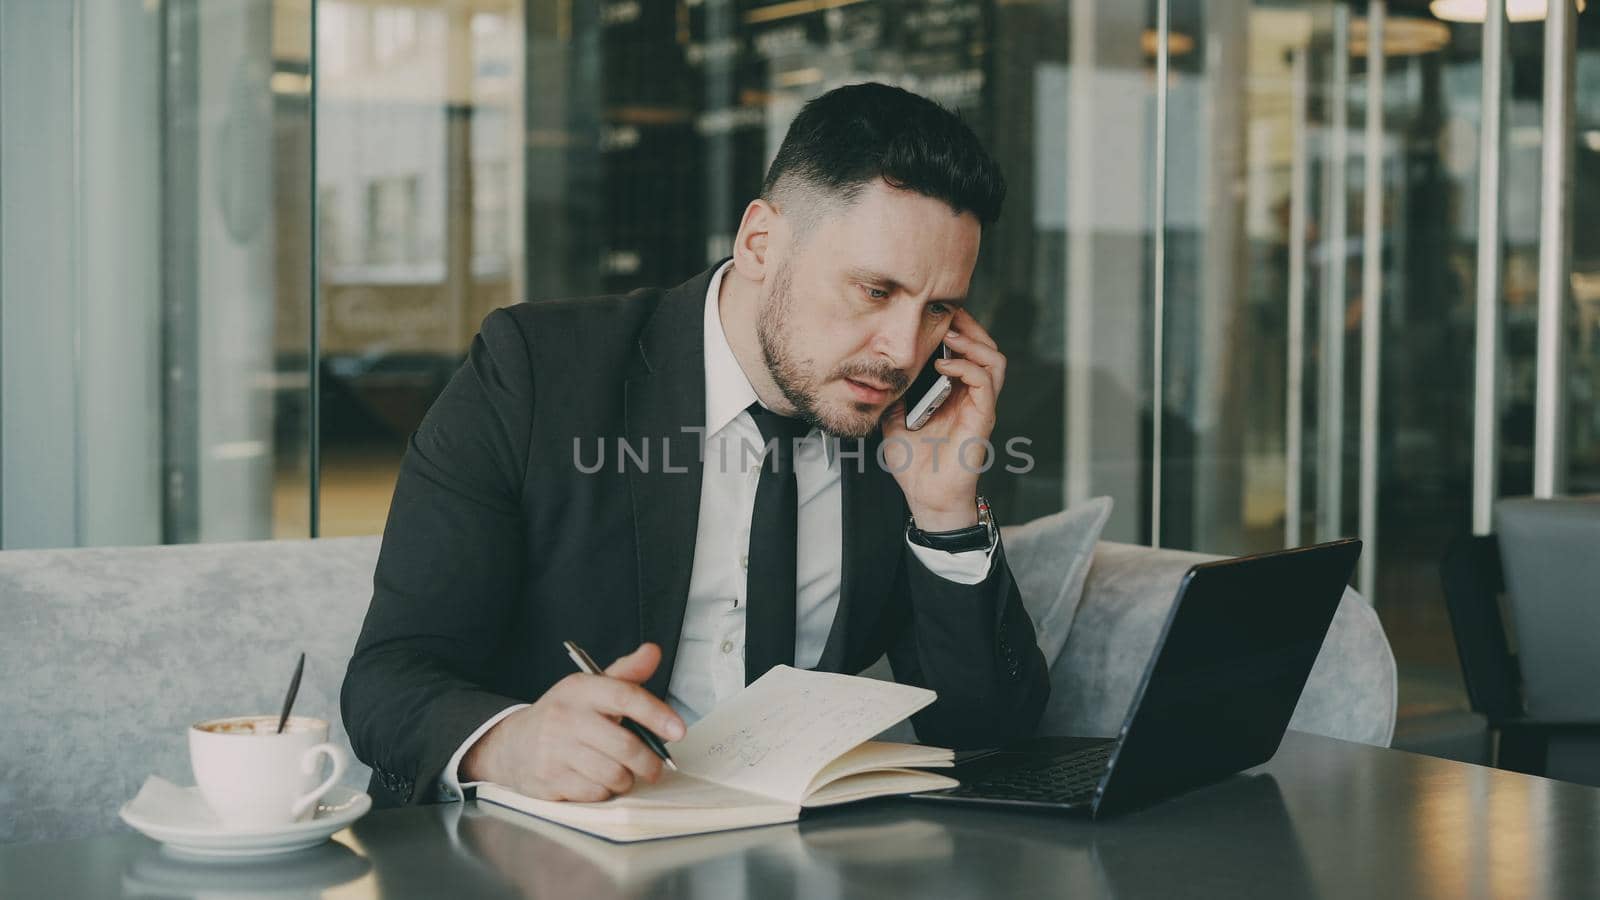 Bearded Caucasian businessman using laptop, talking on smartphone and writing down business information in modern cafe indoors during lunch break